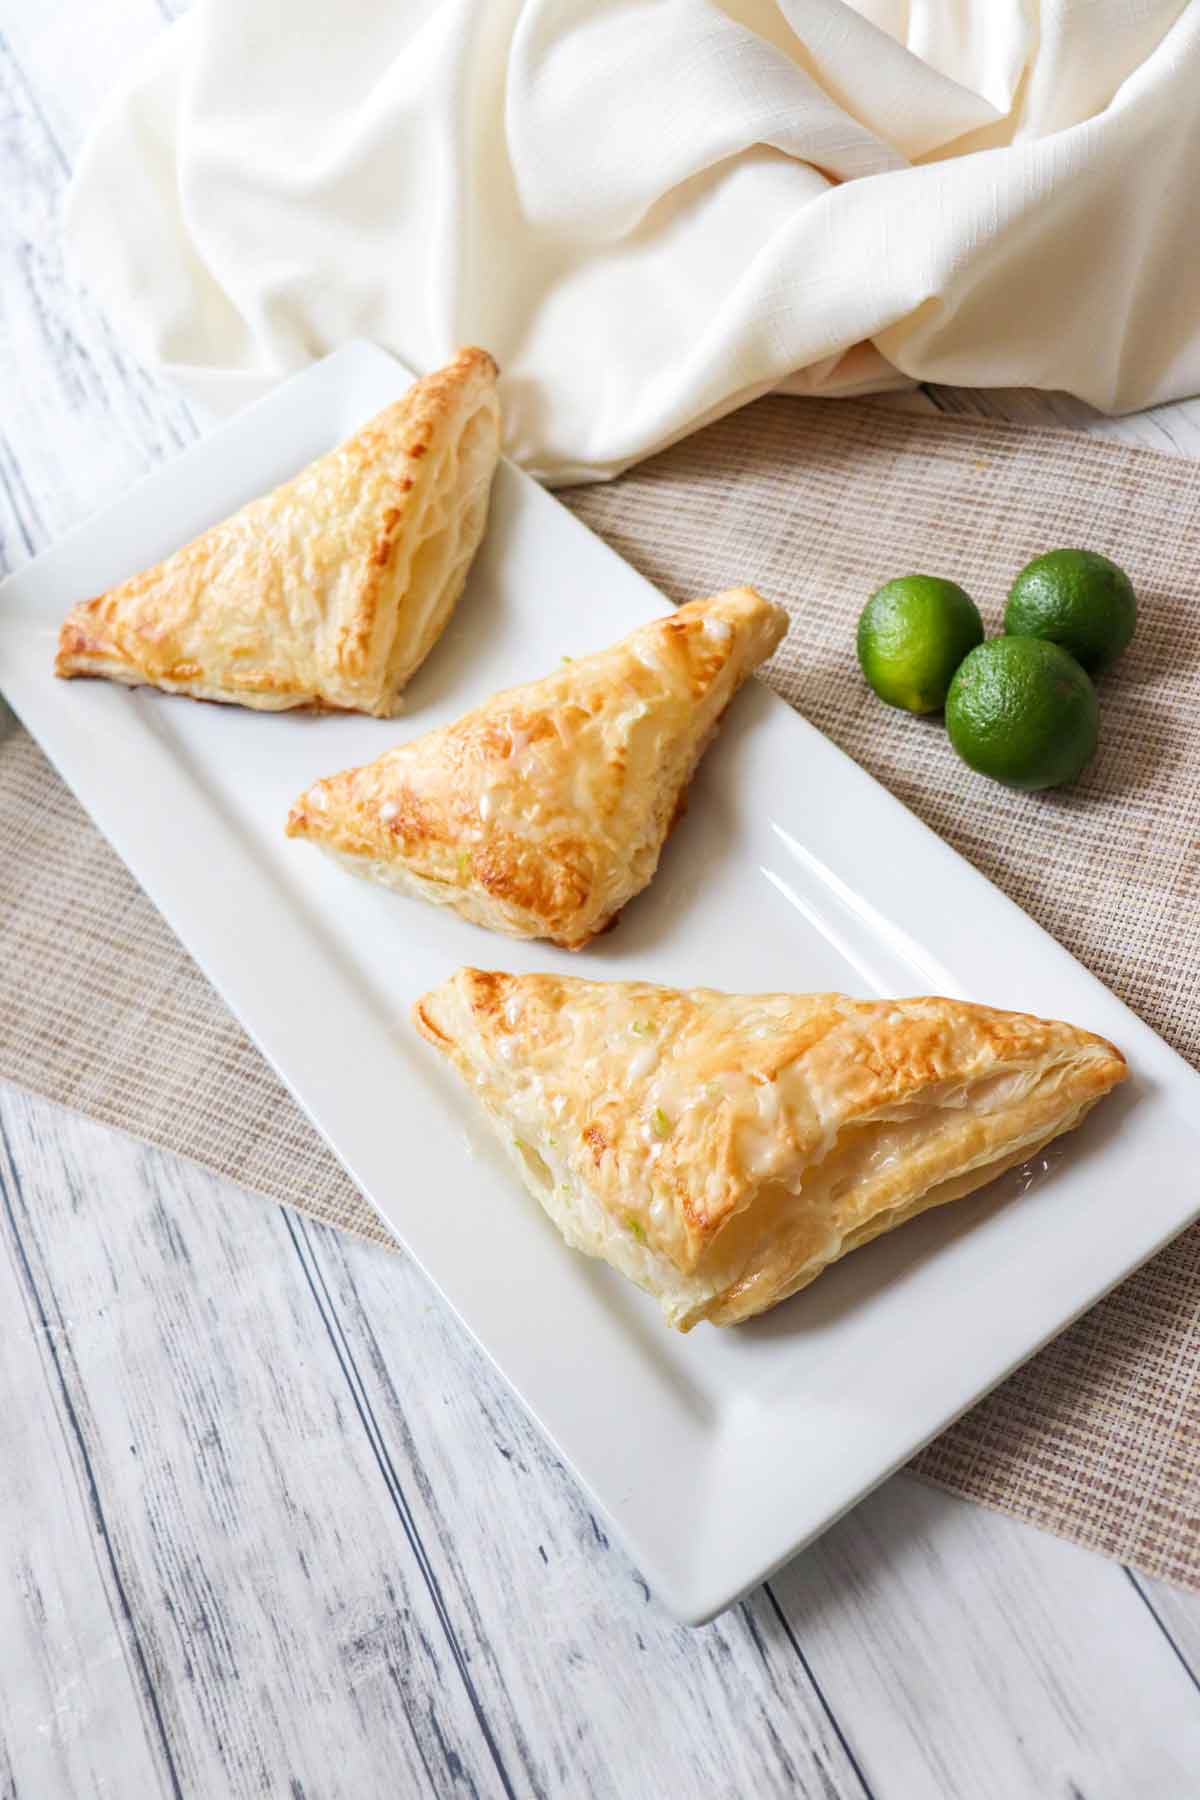 Key Lime Cheesecake Pastries